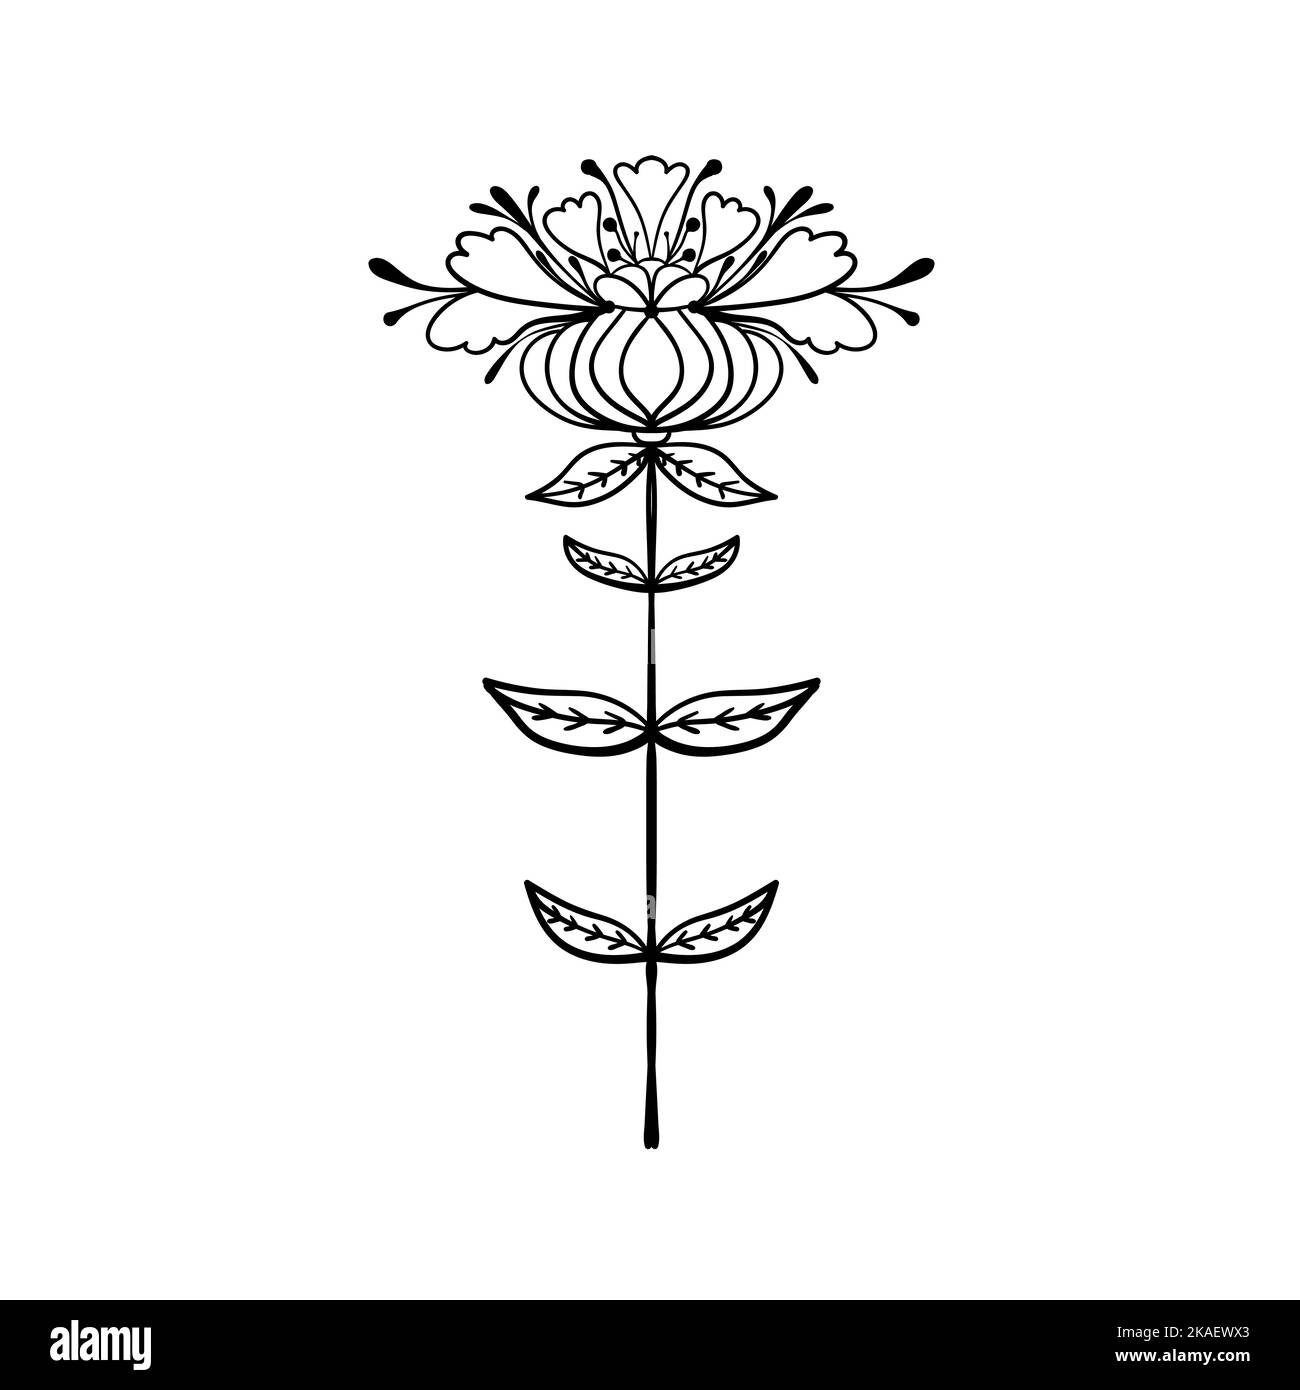 Symmetrical flower in ethnic style. Summer, spting decorative floral element for cards, poster, scrapbook, textile design. Coloring book detail Stock Vector